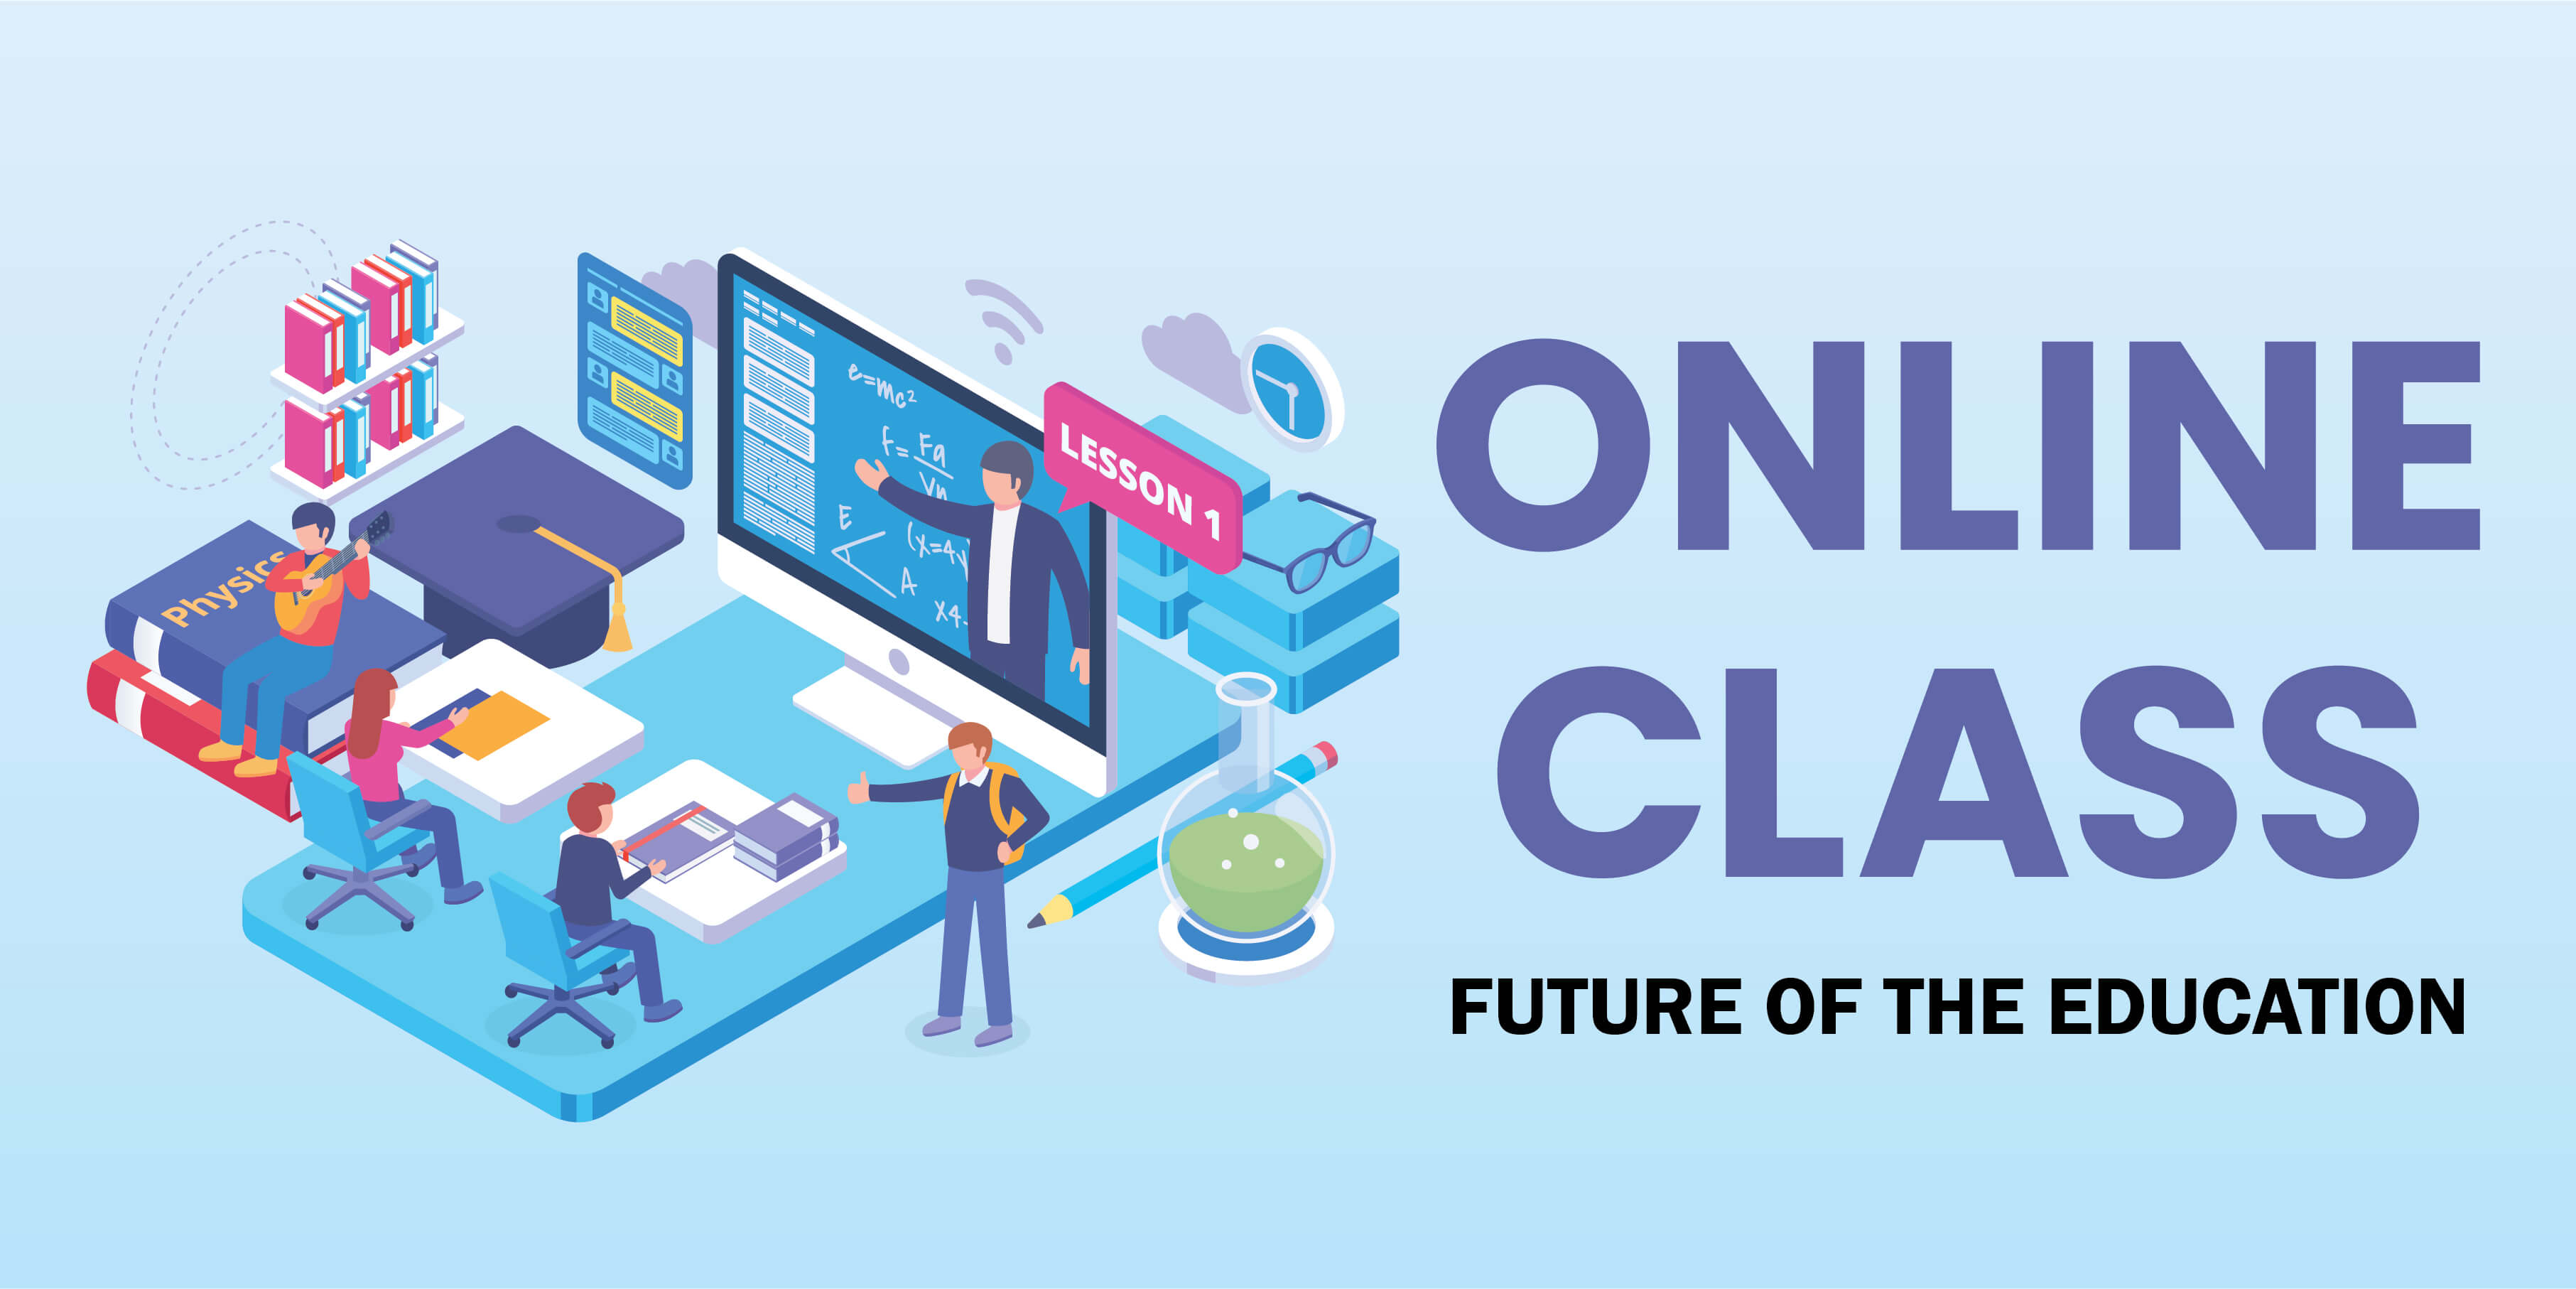 Online Classes: Future of the Education